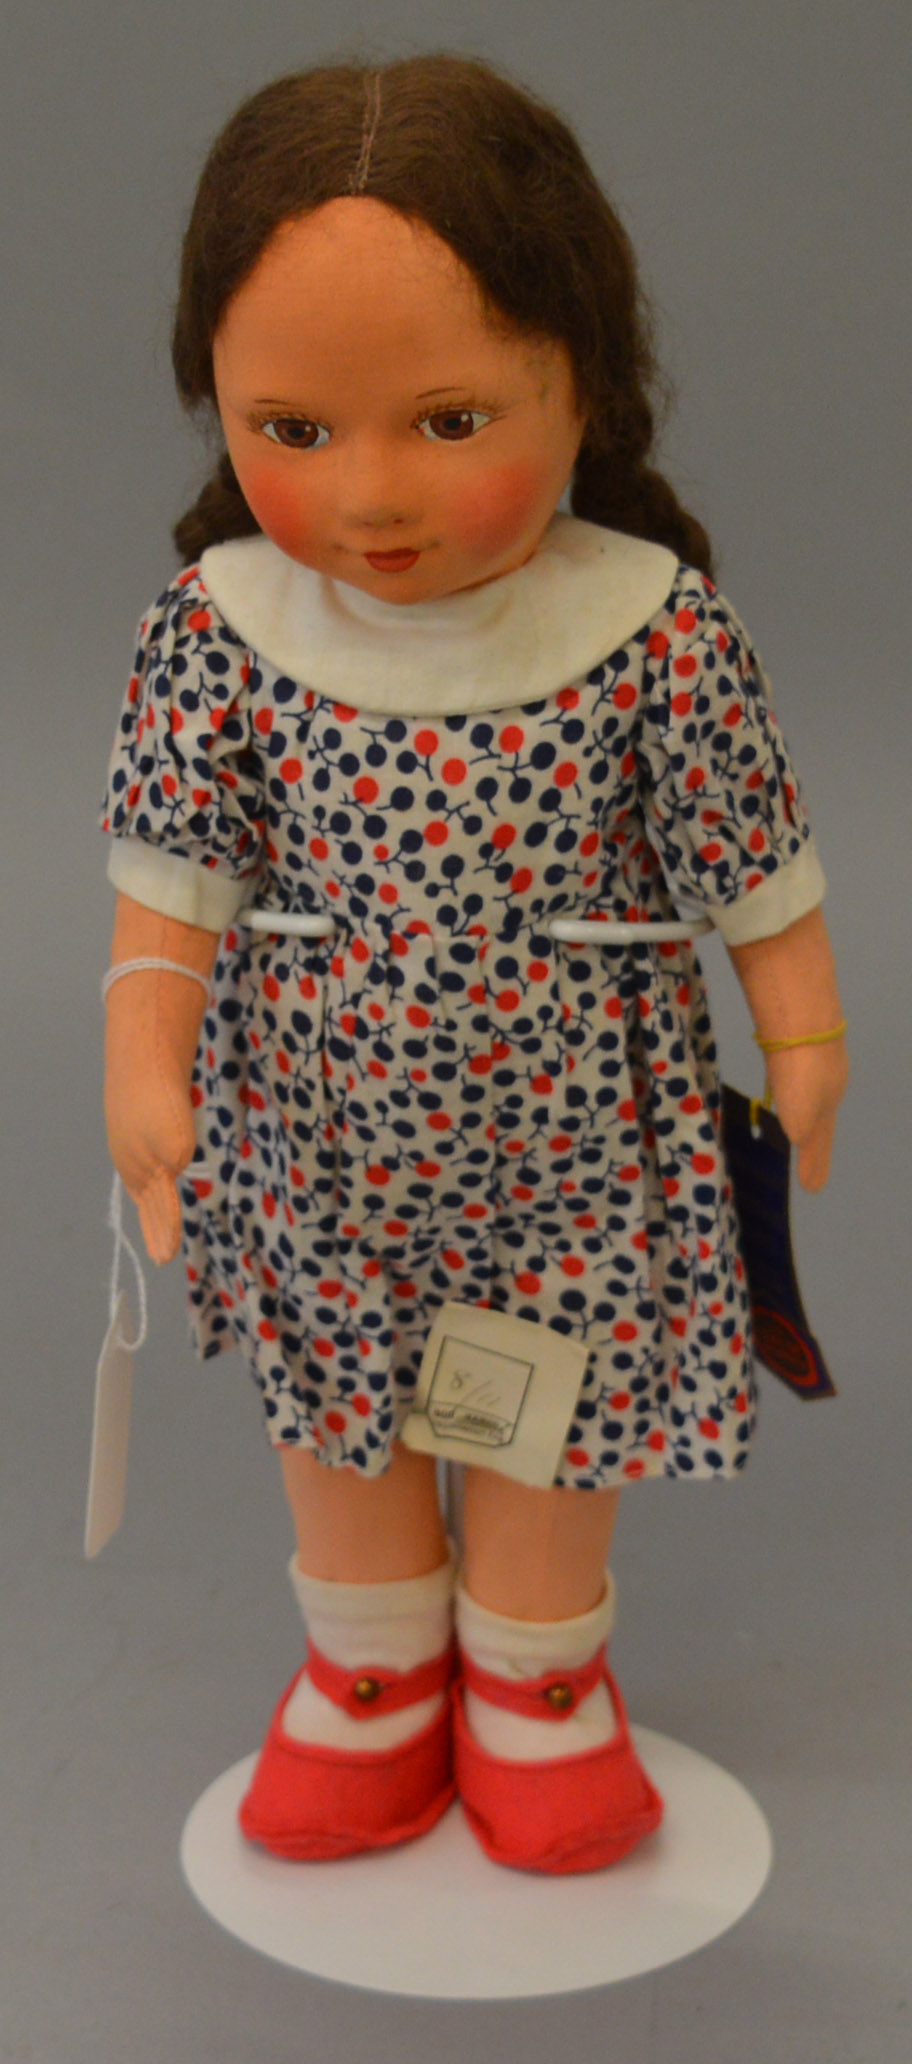 14" Chad Valley girl doll in original clothing with hang tag and original shop price label attached